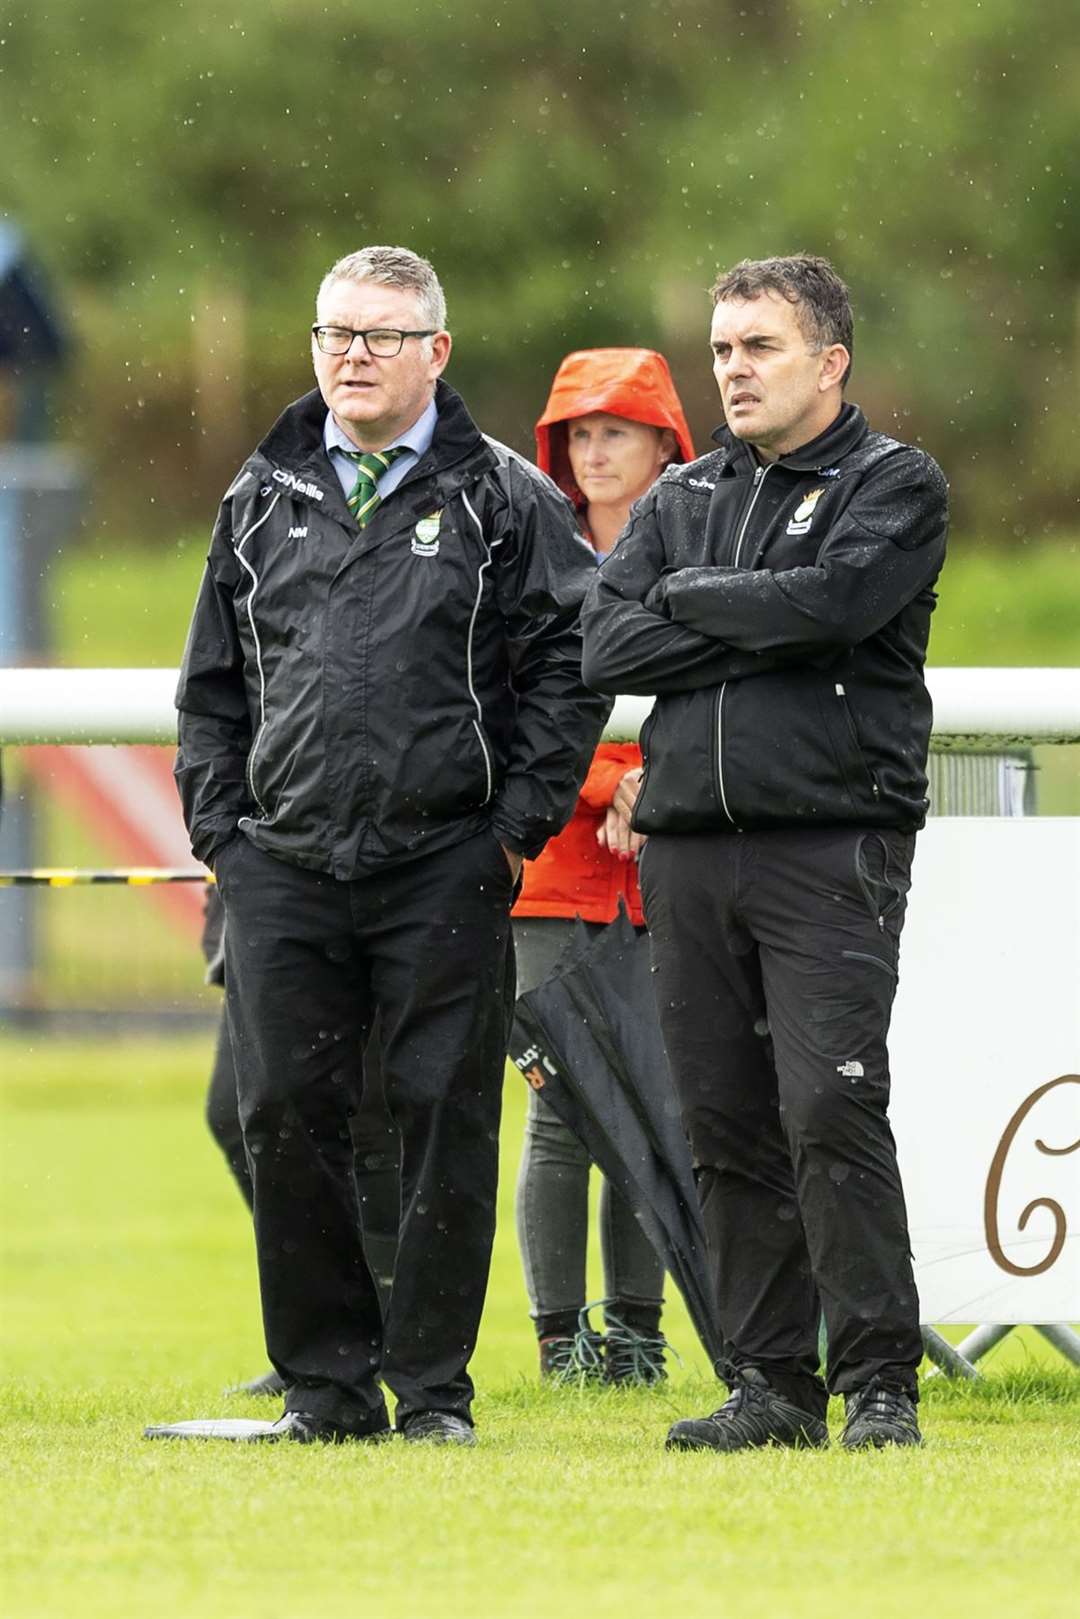 Beauly managers Niall MacLennan (left) and Gregor MacCormick. Beauly v Kyles Athletic in the Tulloch Homes Camanachd Cup quarter final, played at Braeview Park, Beauly..